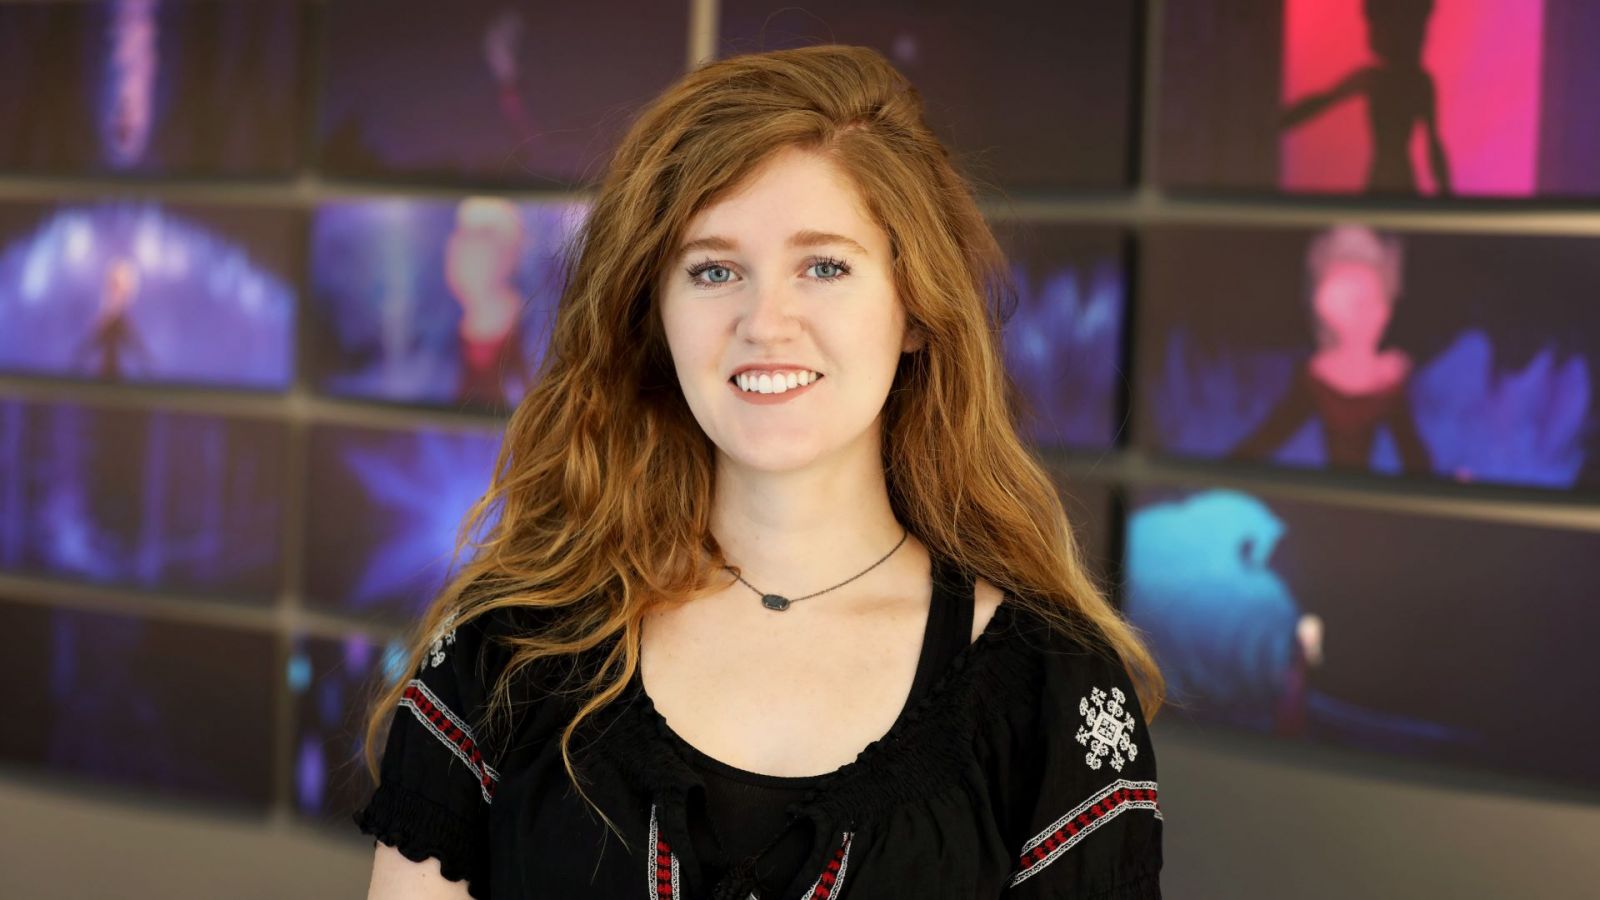 Kaileen Kraemer, an alumna of both the computer graphics technology program at Purdue and Disney animation teams. (Photo provided)